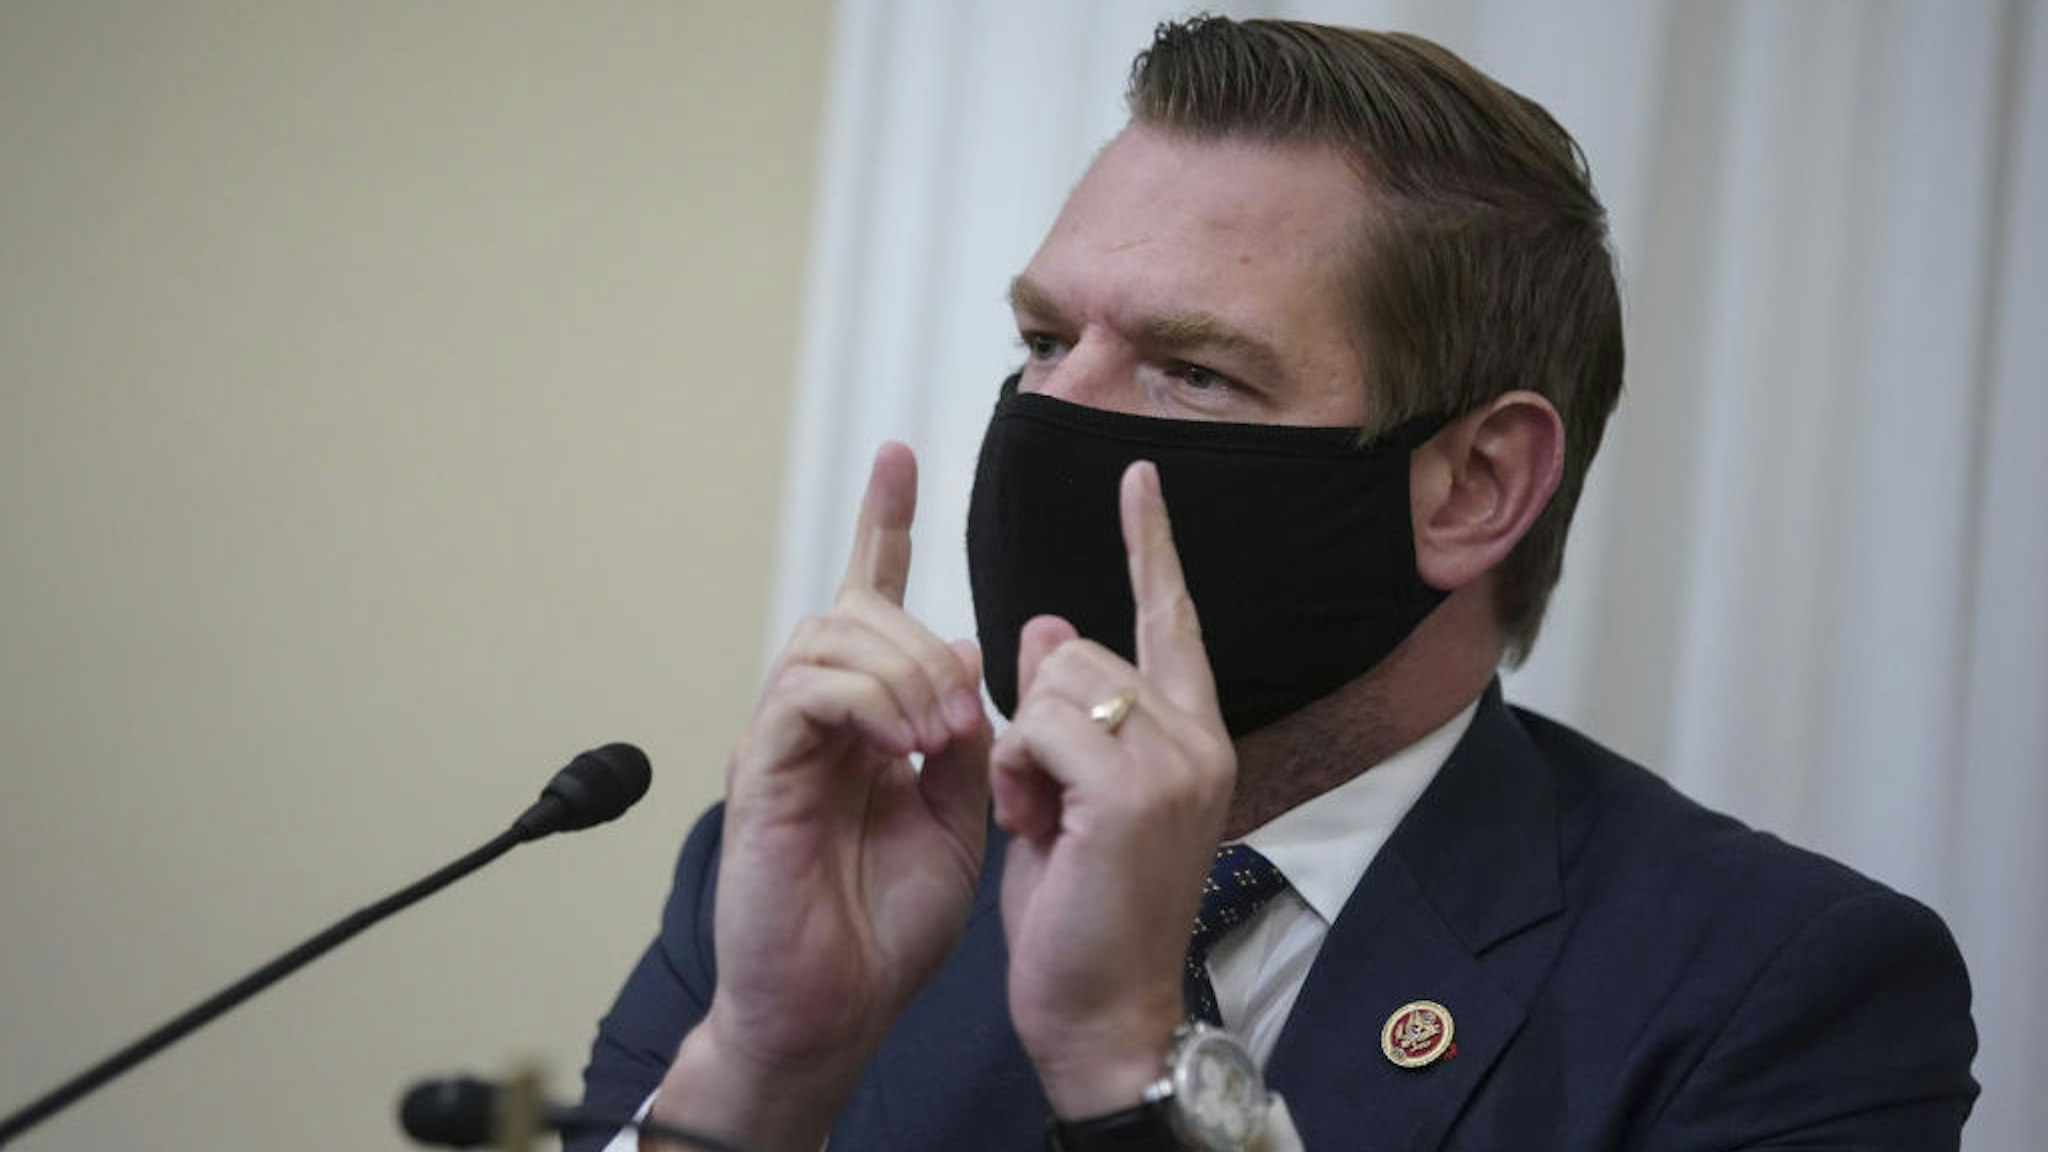 Representative Eric Swalwell, a Democrat from California, wears a protective mask while speaking during a House Intelligence Committee hearing in Washington, D.C., U.S., on Thursday, April 15, 2021. The hearing follows the release of an unclassified report by the intelligence community detailing the U.S. and its allies will face "a diverse array of threats" in the coming year, with aggression by Russia, China and Iran. Photographer: Al Drago/Bloomberg